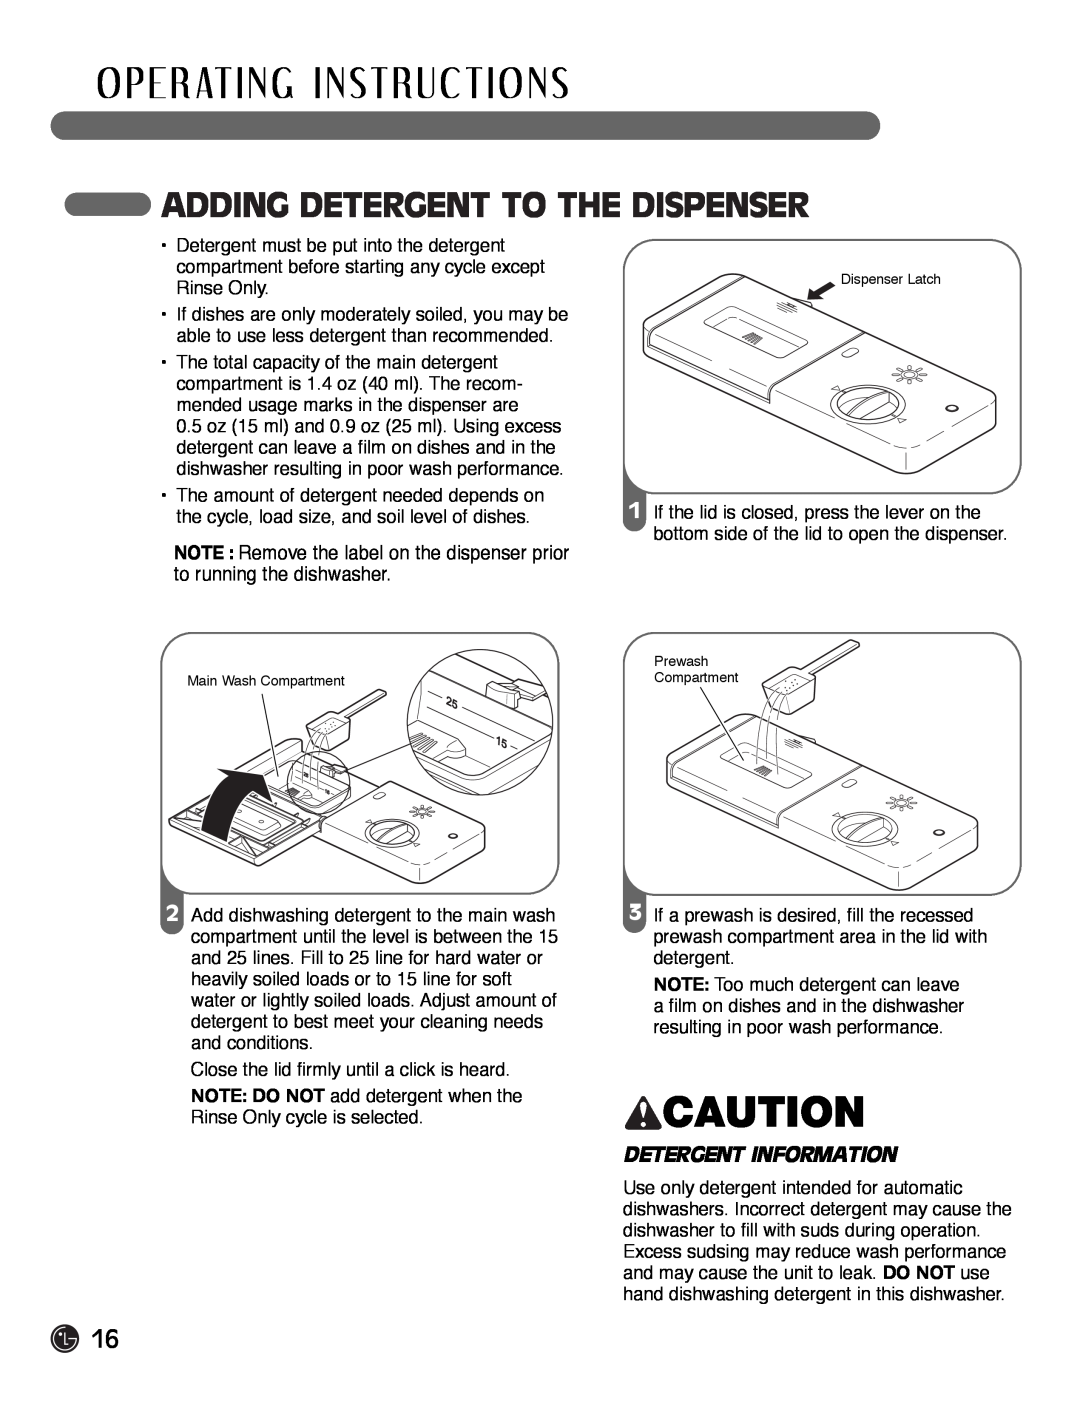 LG Electronics LDF7932BB Detergent Information, O P E R At I N G I N S T Ru C T I O N S, Adding Detergent To The Dispenser 